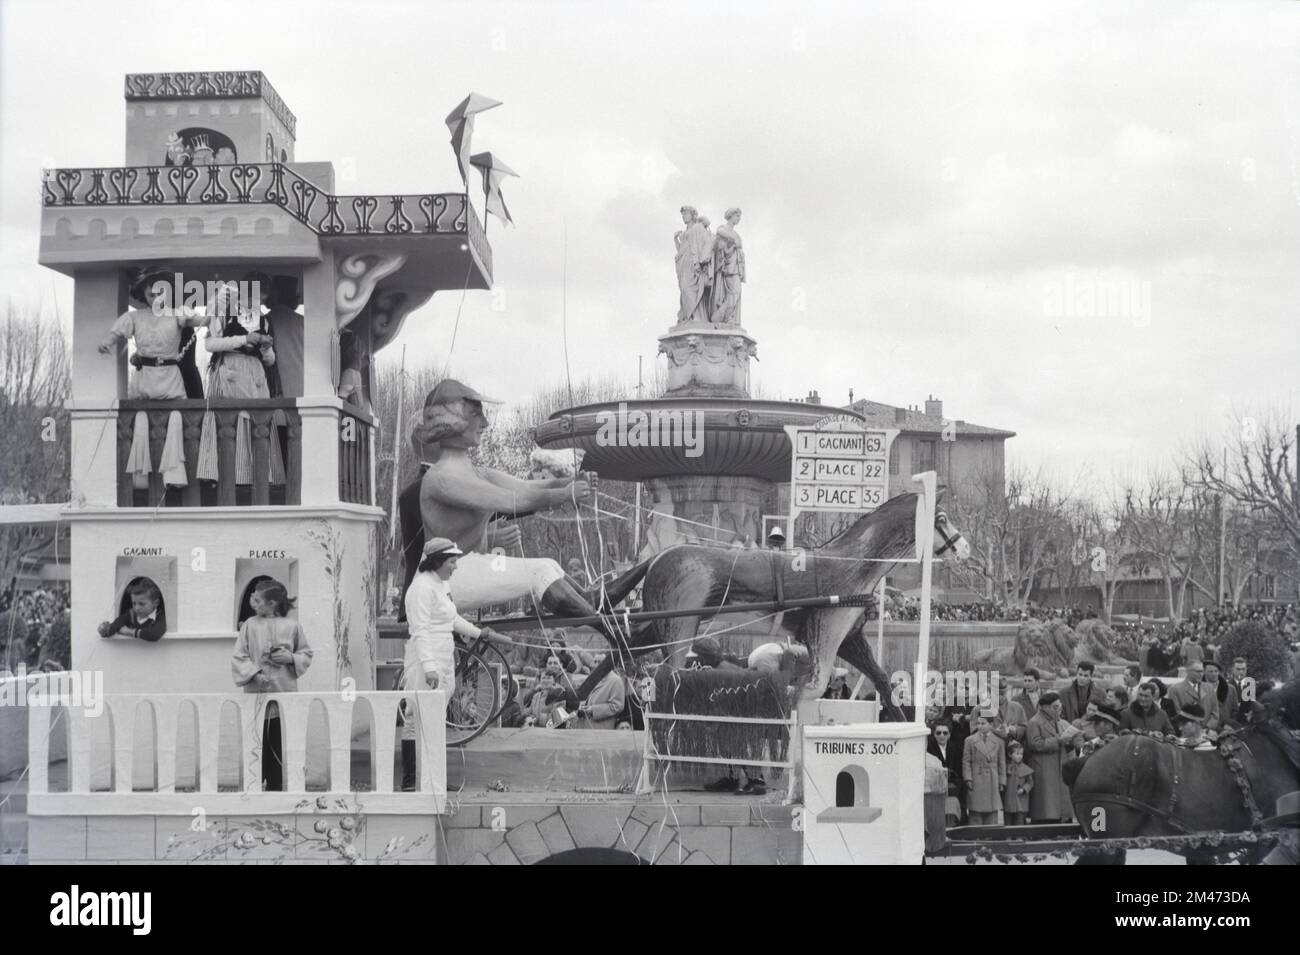 Spring Carnival Float on Horse Riding or Horse Racing Theme Passing the Rotonde Fountain at the Western End of the Cours Mirabeau Aix or Aix-en-Provence Provence France. Vintage Black and White or Monochrome Image 1954 Stock Photo